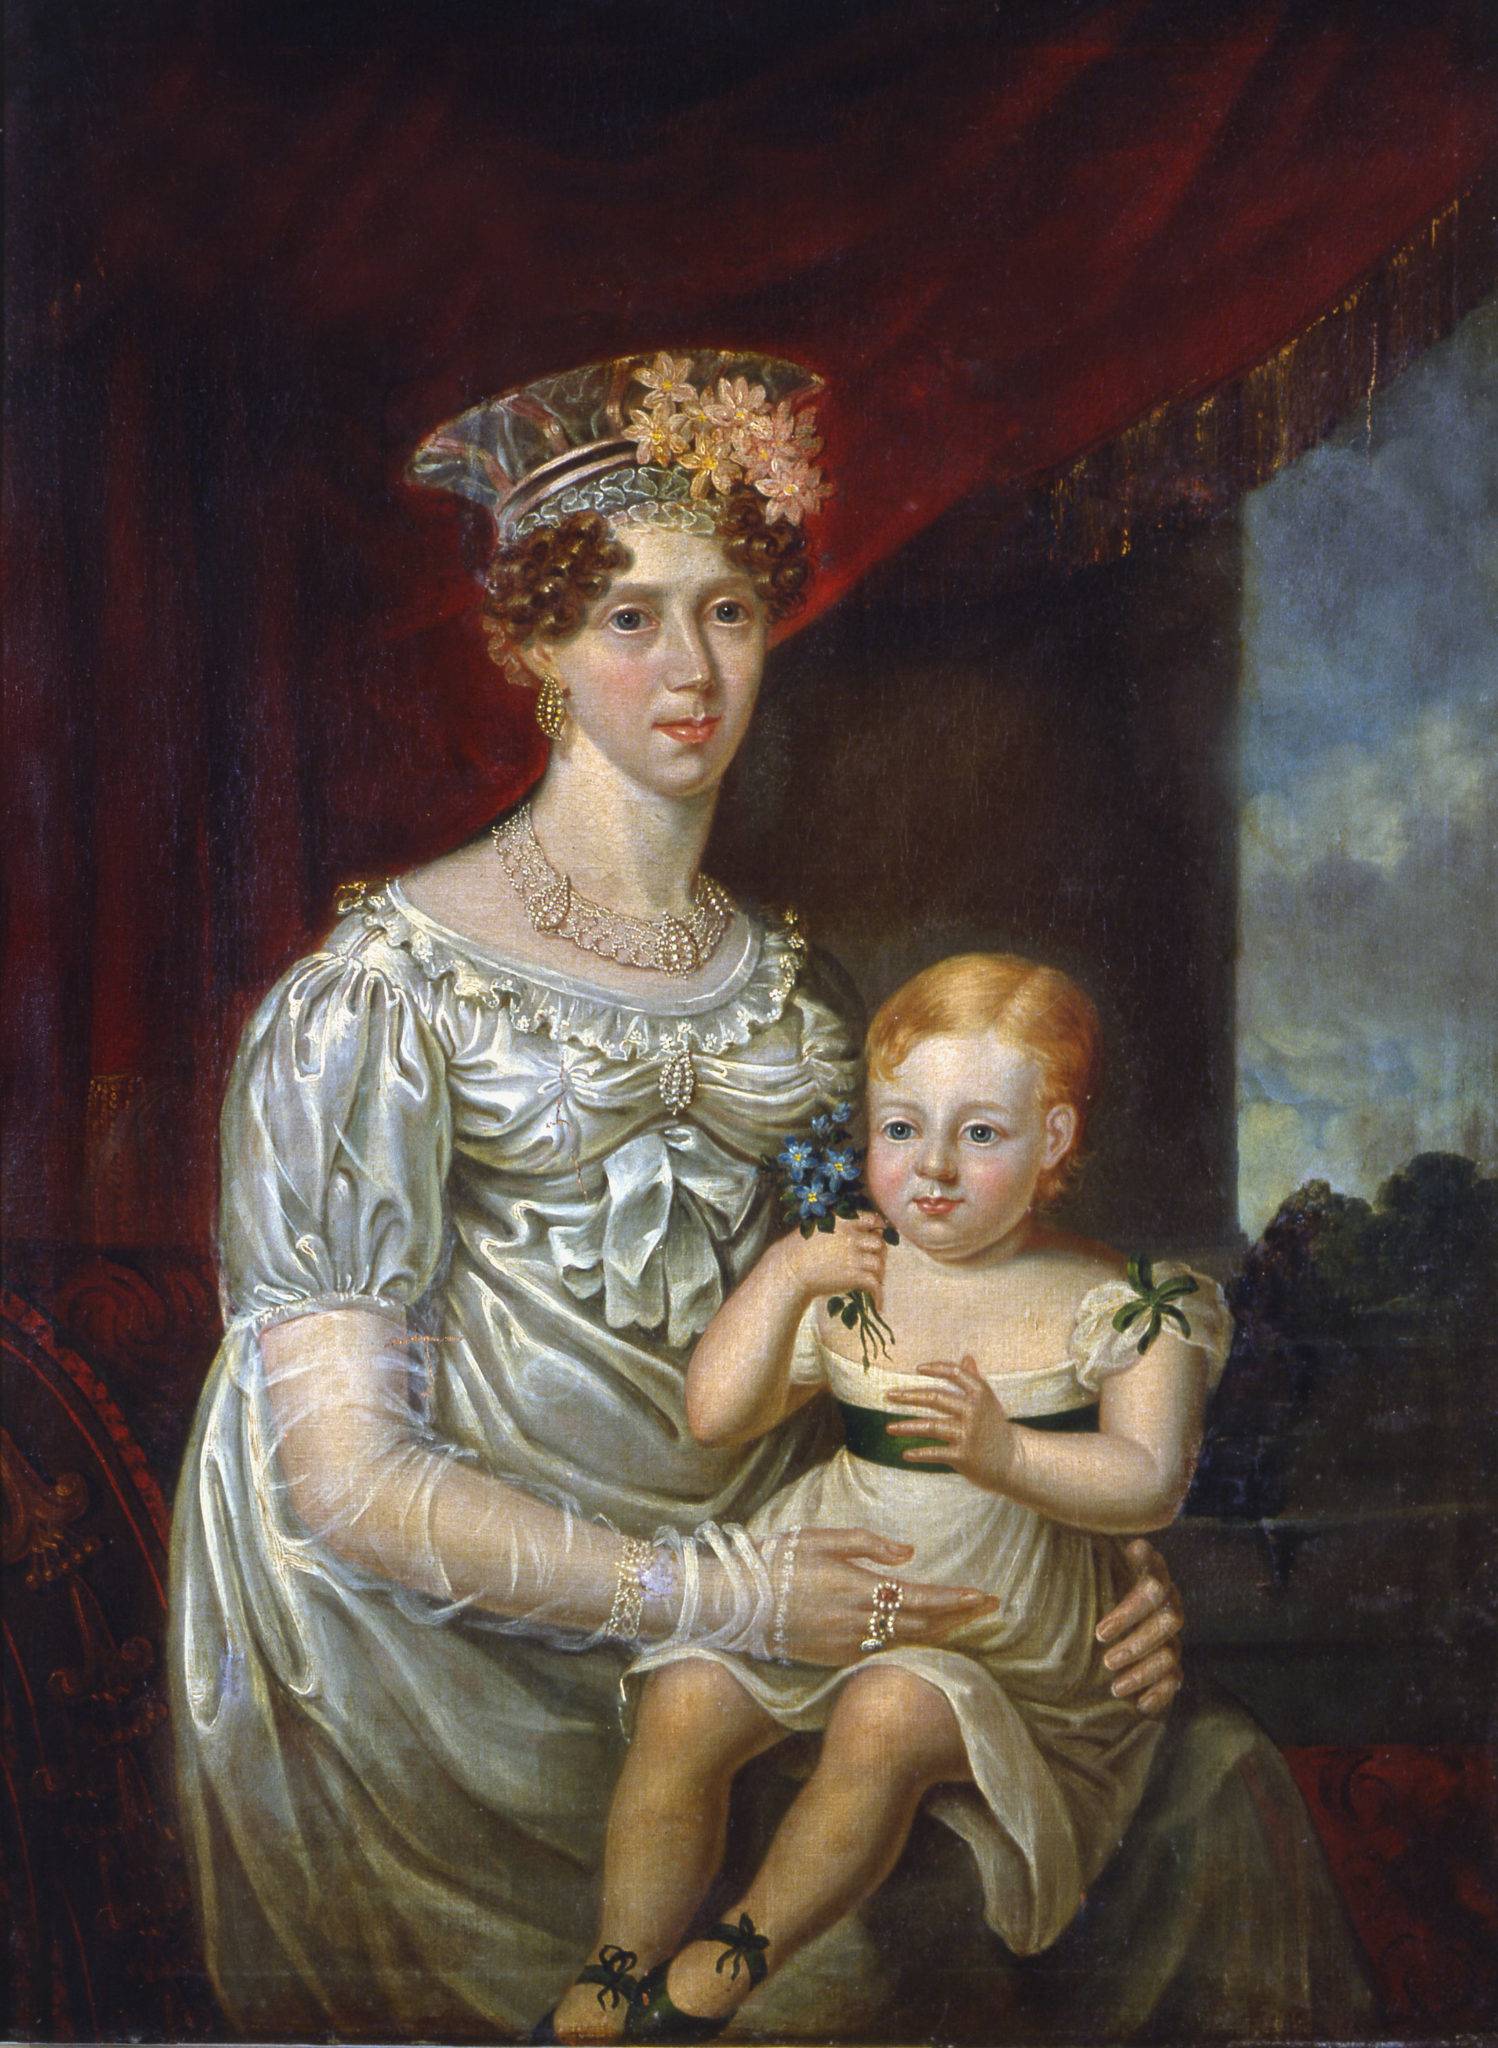 Mary O'Connell (wife of Daniel O'Connell) with her youngest son, Daniel. OPW